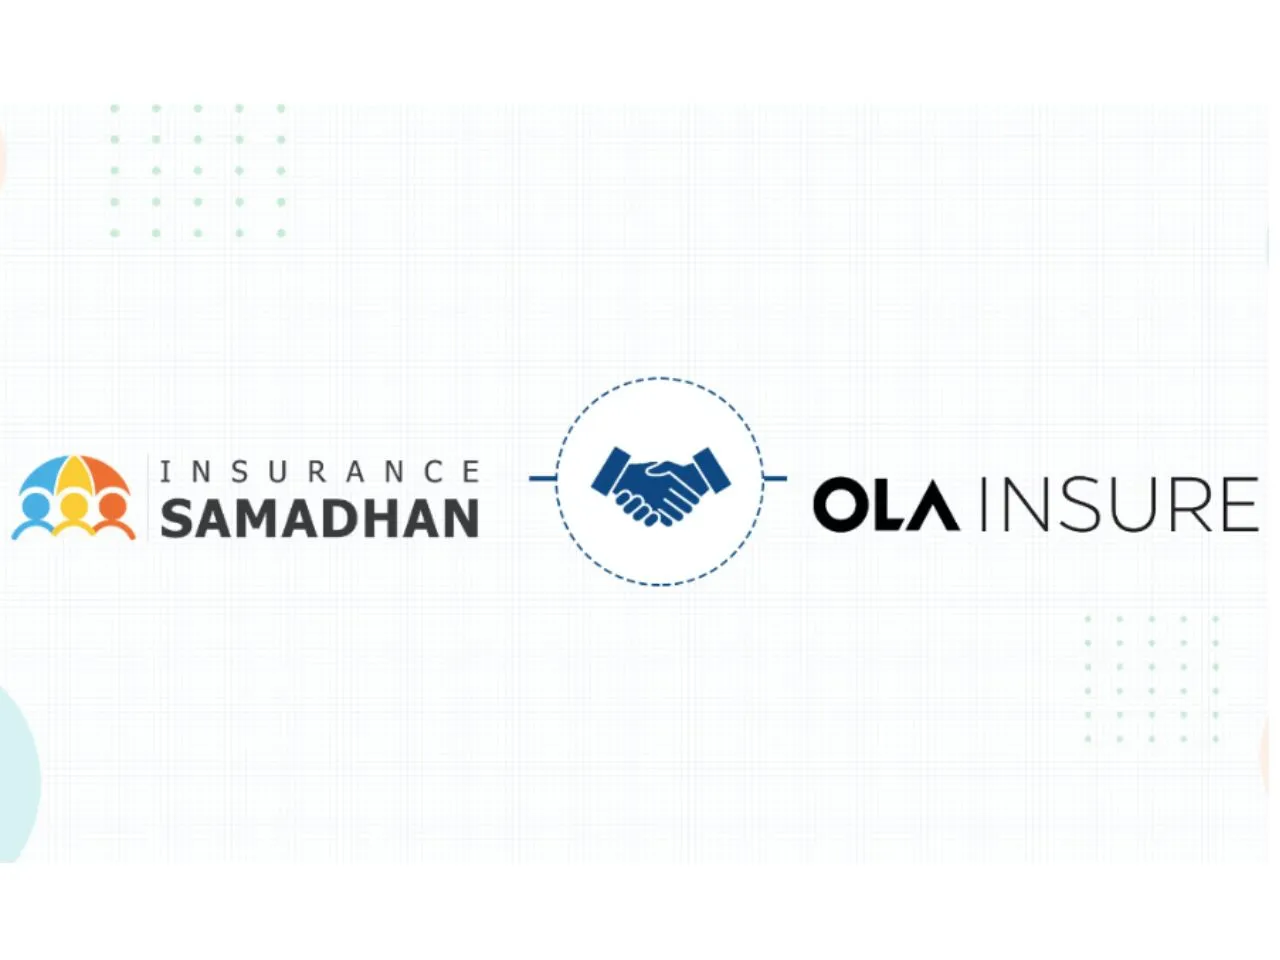 Insurance Samadhan & Ola Insure collaborate to enhance insurance solutions for customers